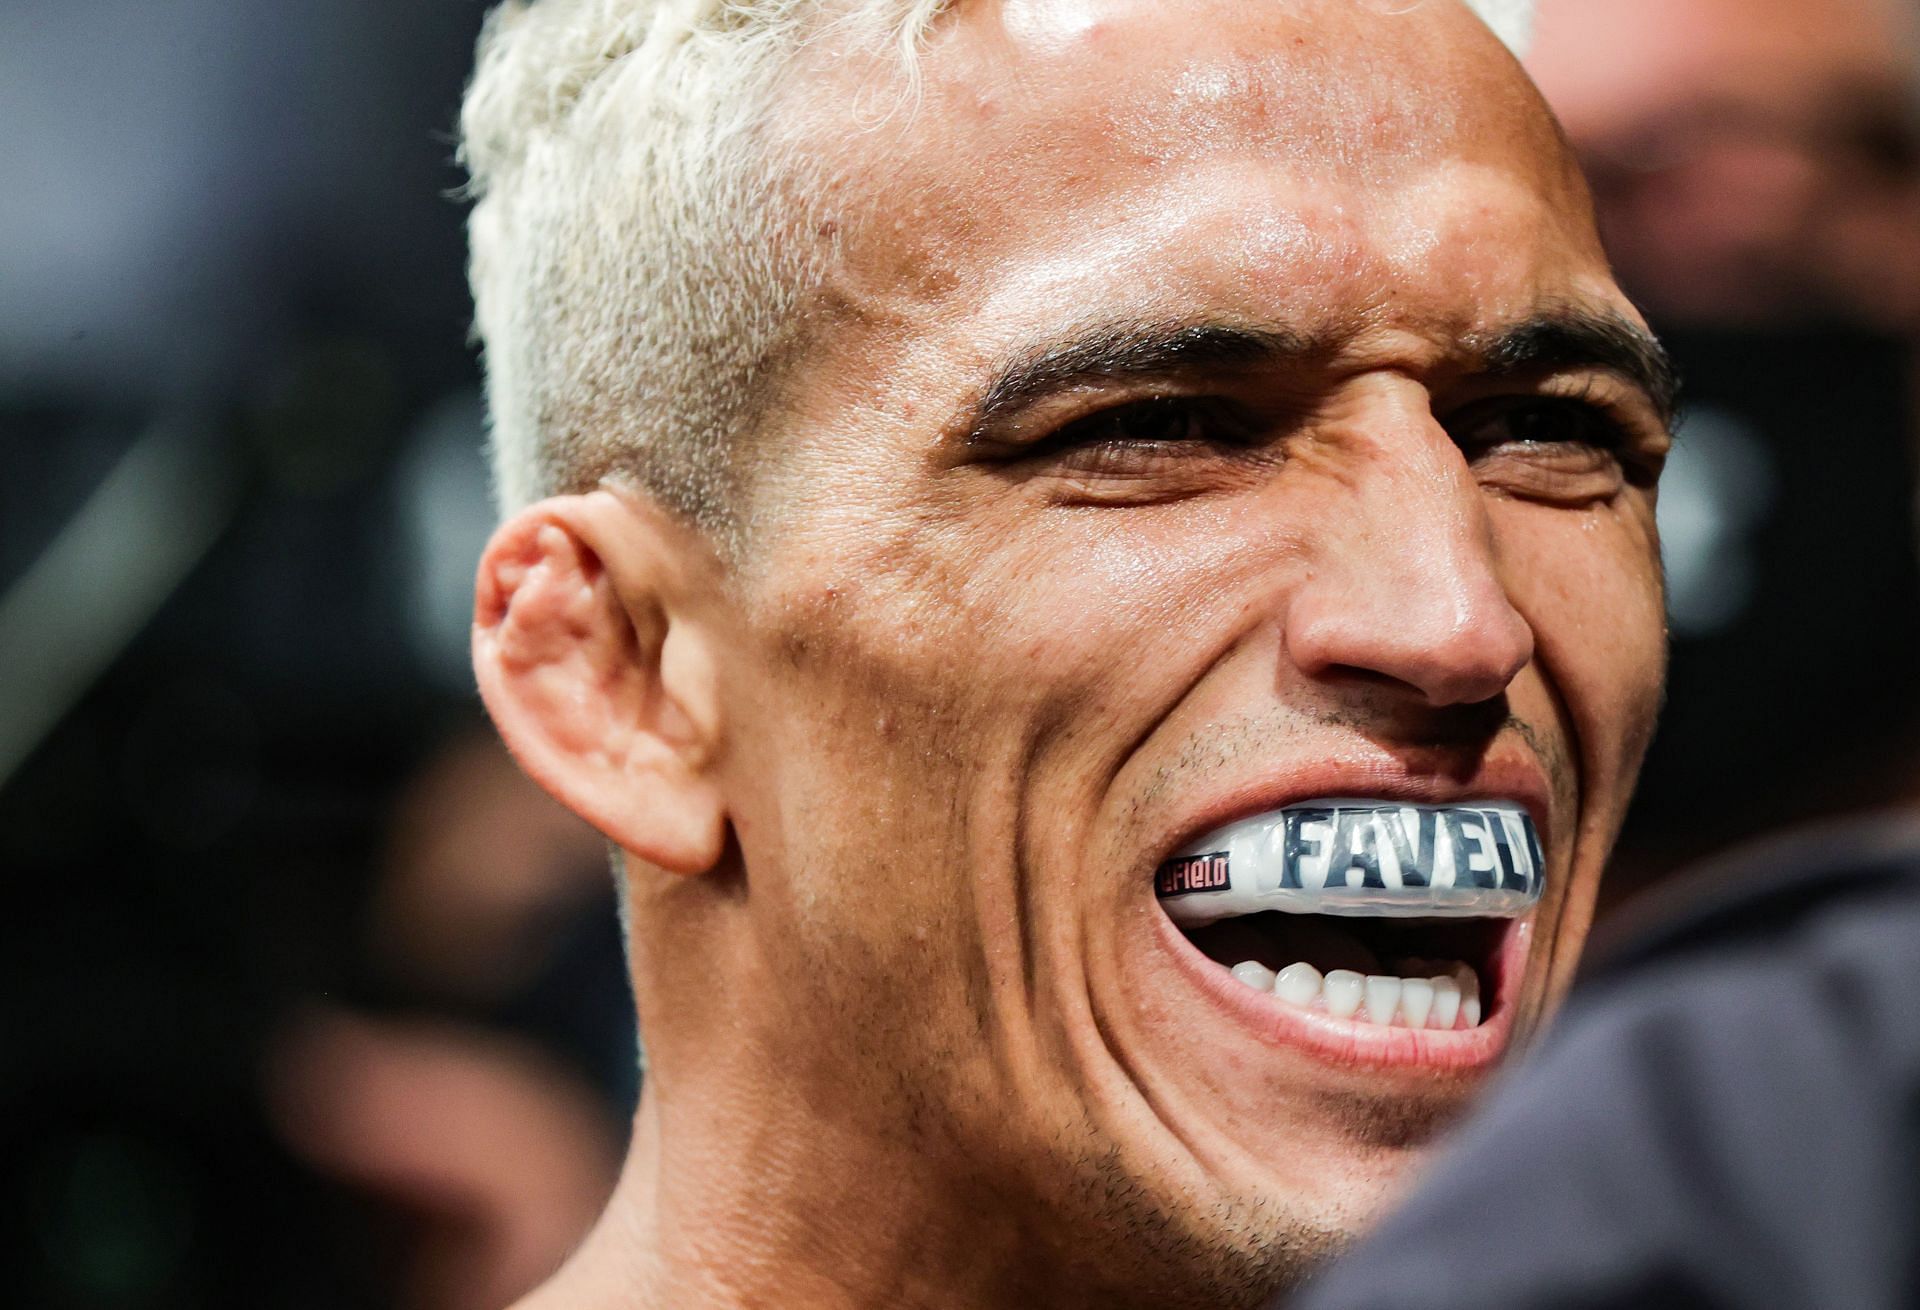 Charles Oliveira finally winning gold was one of the biggest stories from 2021